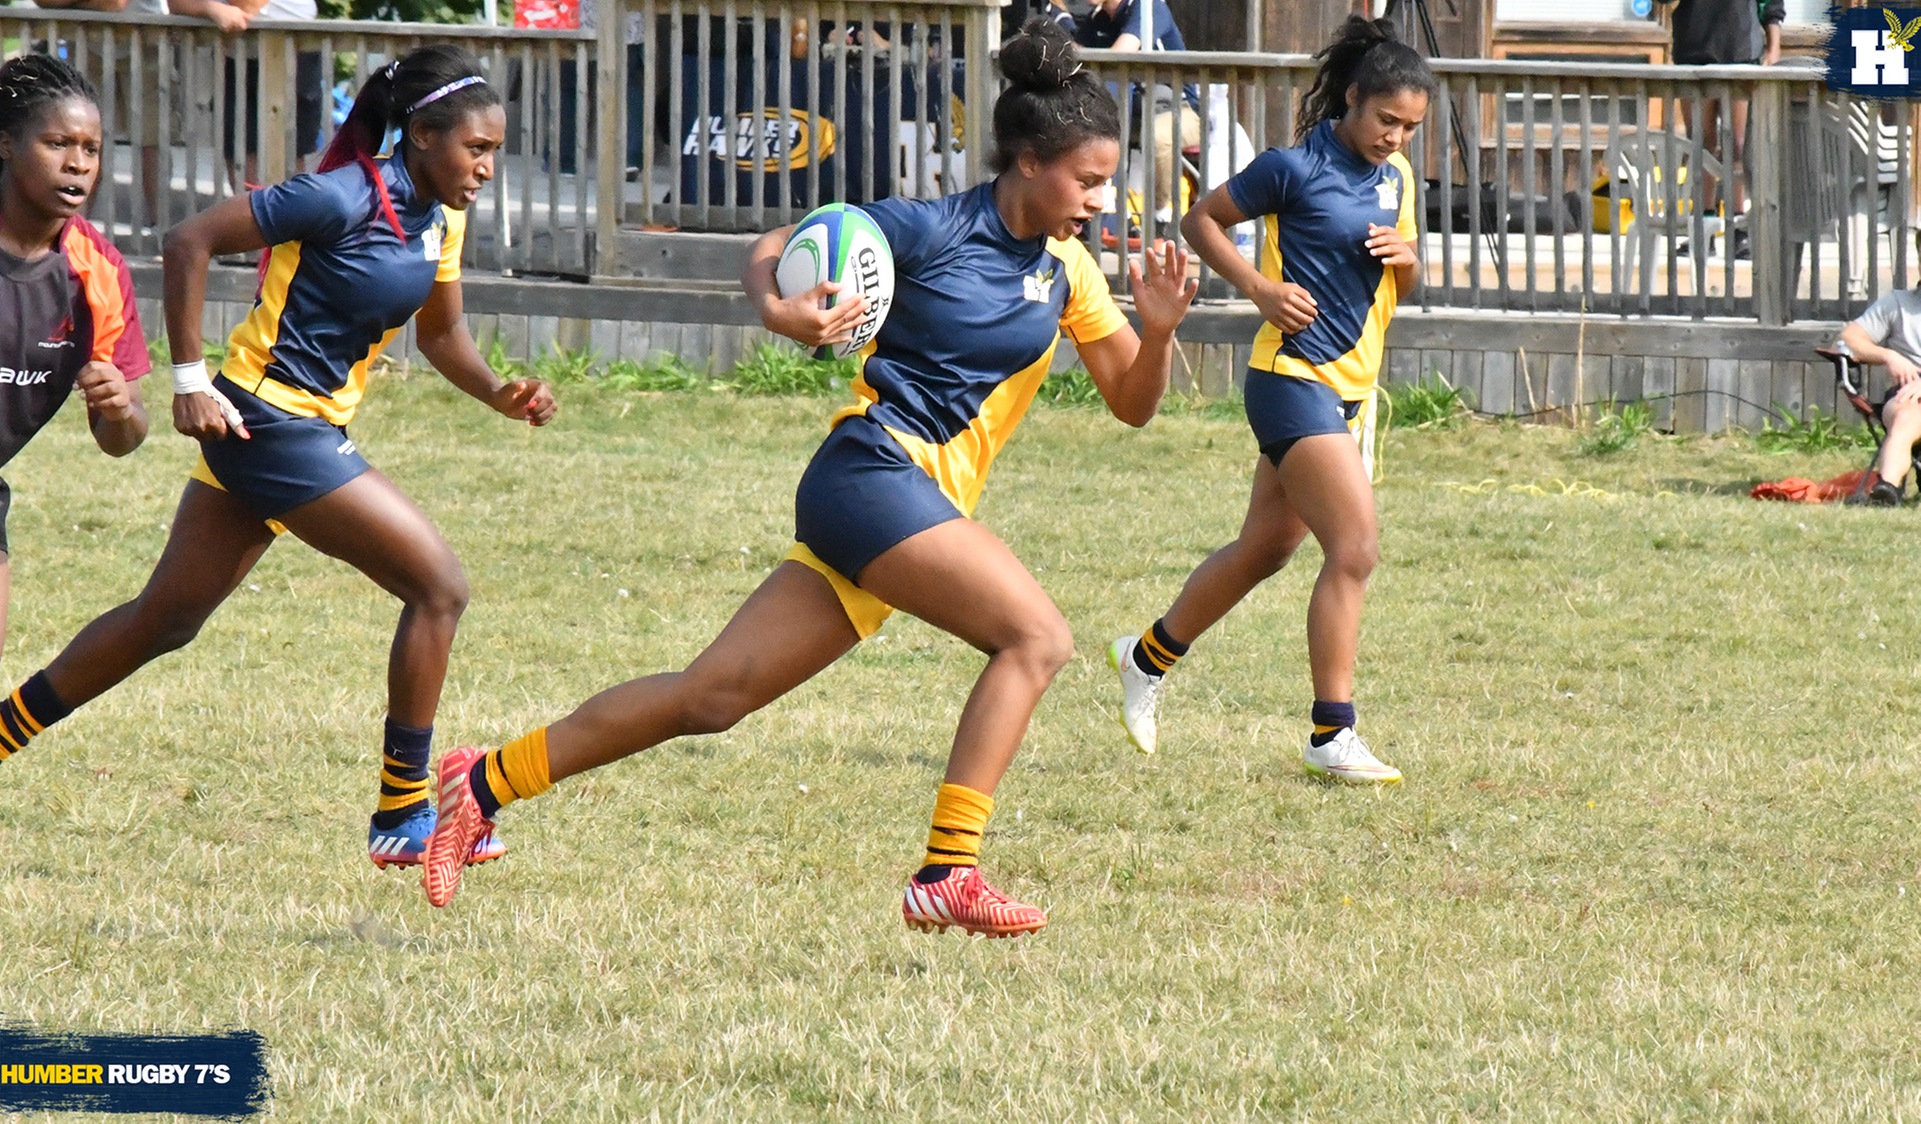 RUGBY 7'S BEGINS '18 CAMPAIGN ON SATURDAY AT SHERIDAN